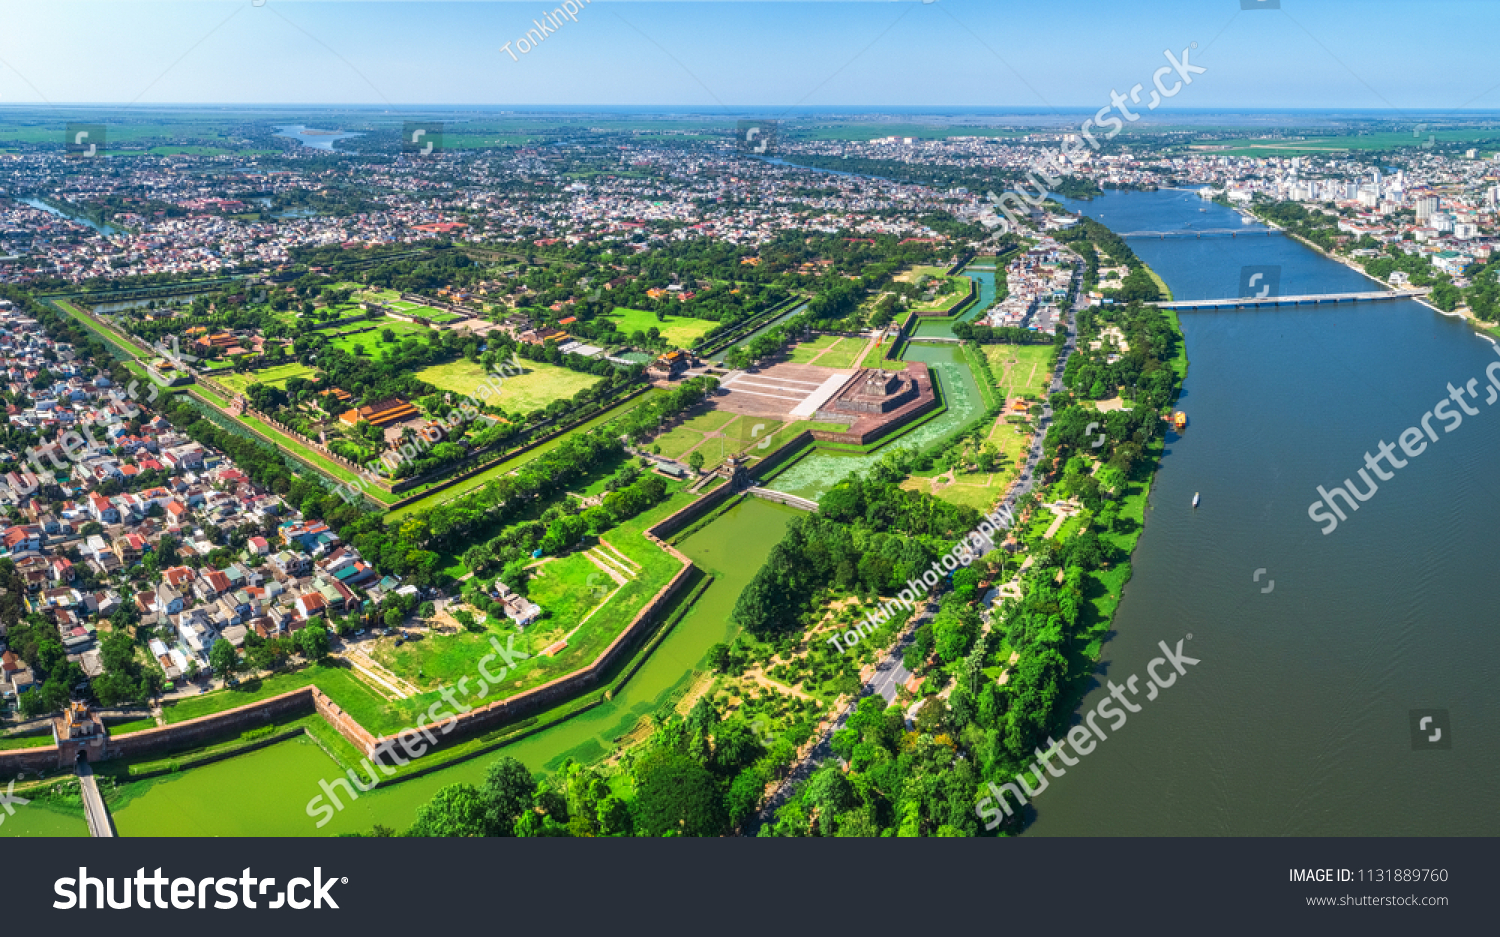 Aerial view of the Hue Citadel in Vietnam. Imperial Palace moat,Emperor palace complex, Hue Province, Vietnam #1131889760